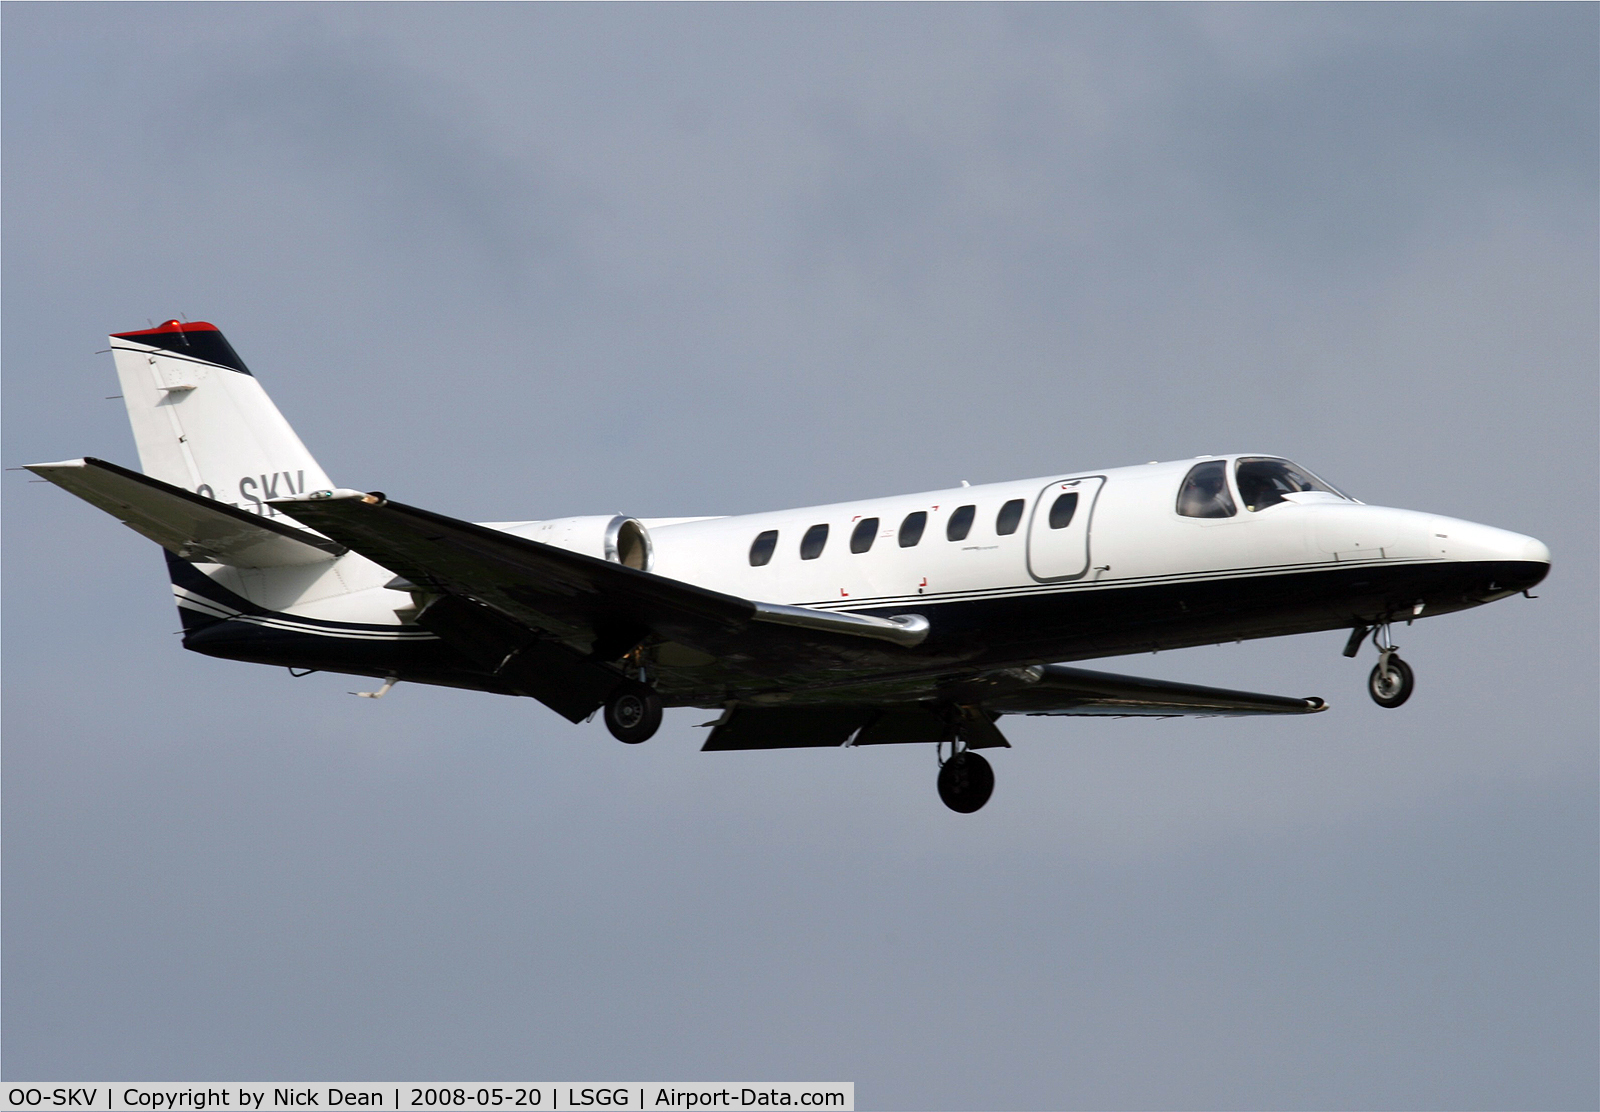 OO-SKV, 1996 Cessna 560 Citation V C/N 560-0153, LSGG (Year of manufacture is actually 1991 not as posted 1996)